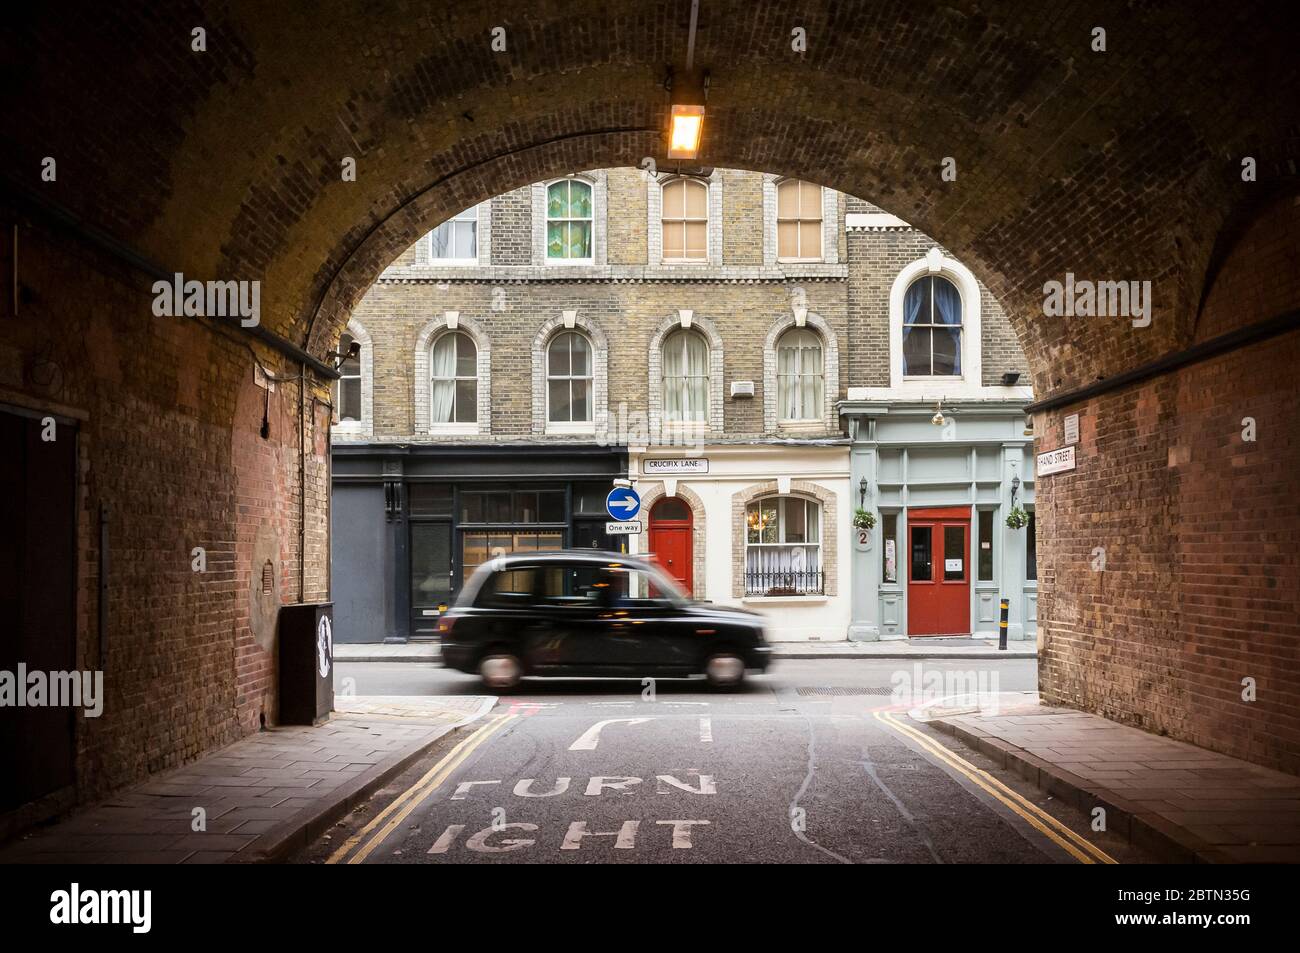 Traditional London black cab driving along Crucifix Lane in Borough, as seen through the railway arch of Shand Street, in Southwark, London SE1, Engla Stock Photo